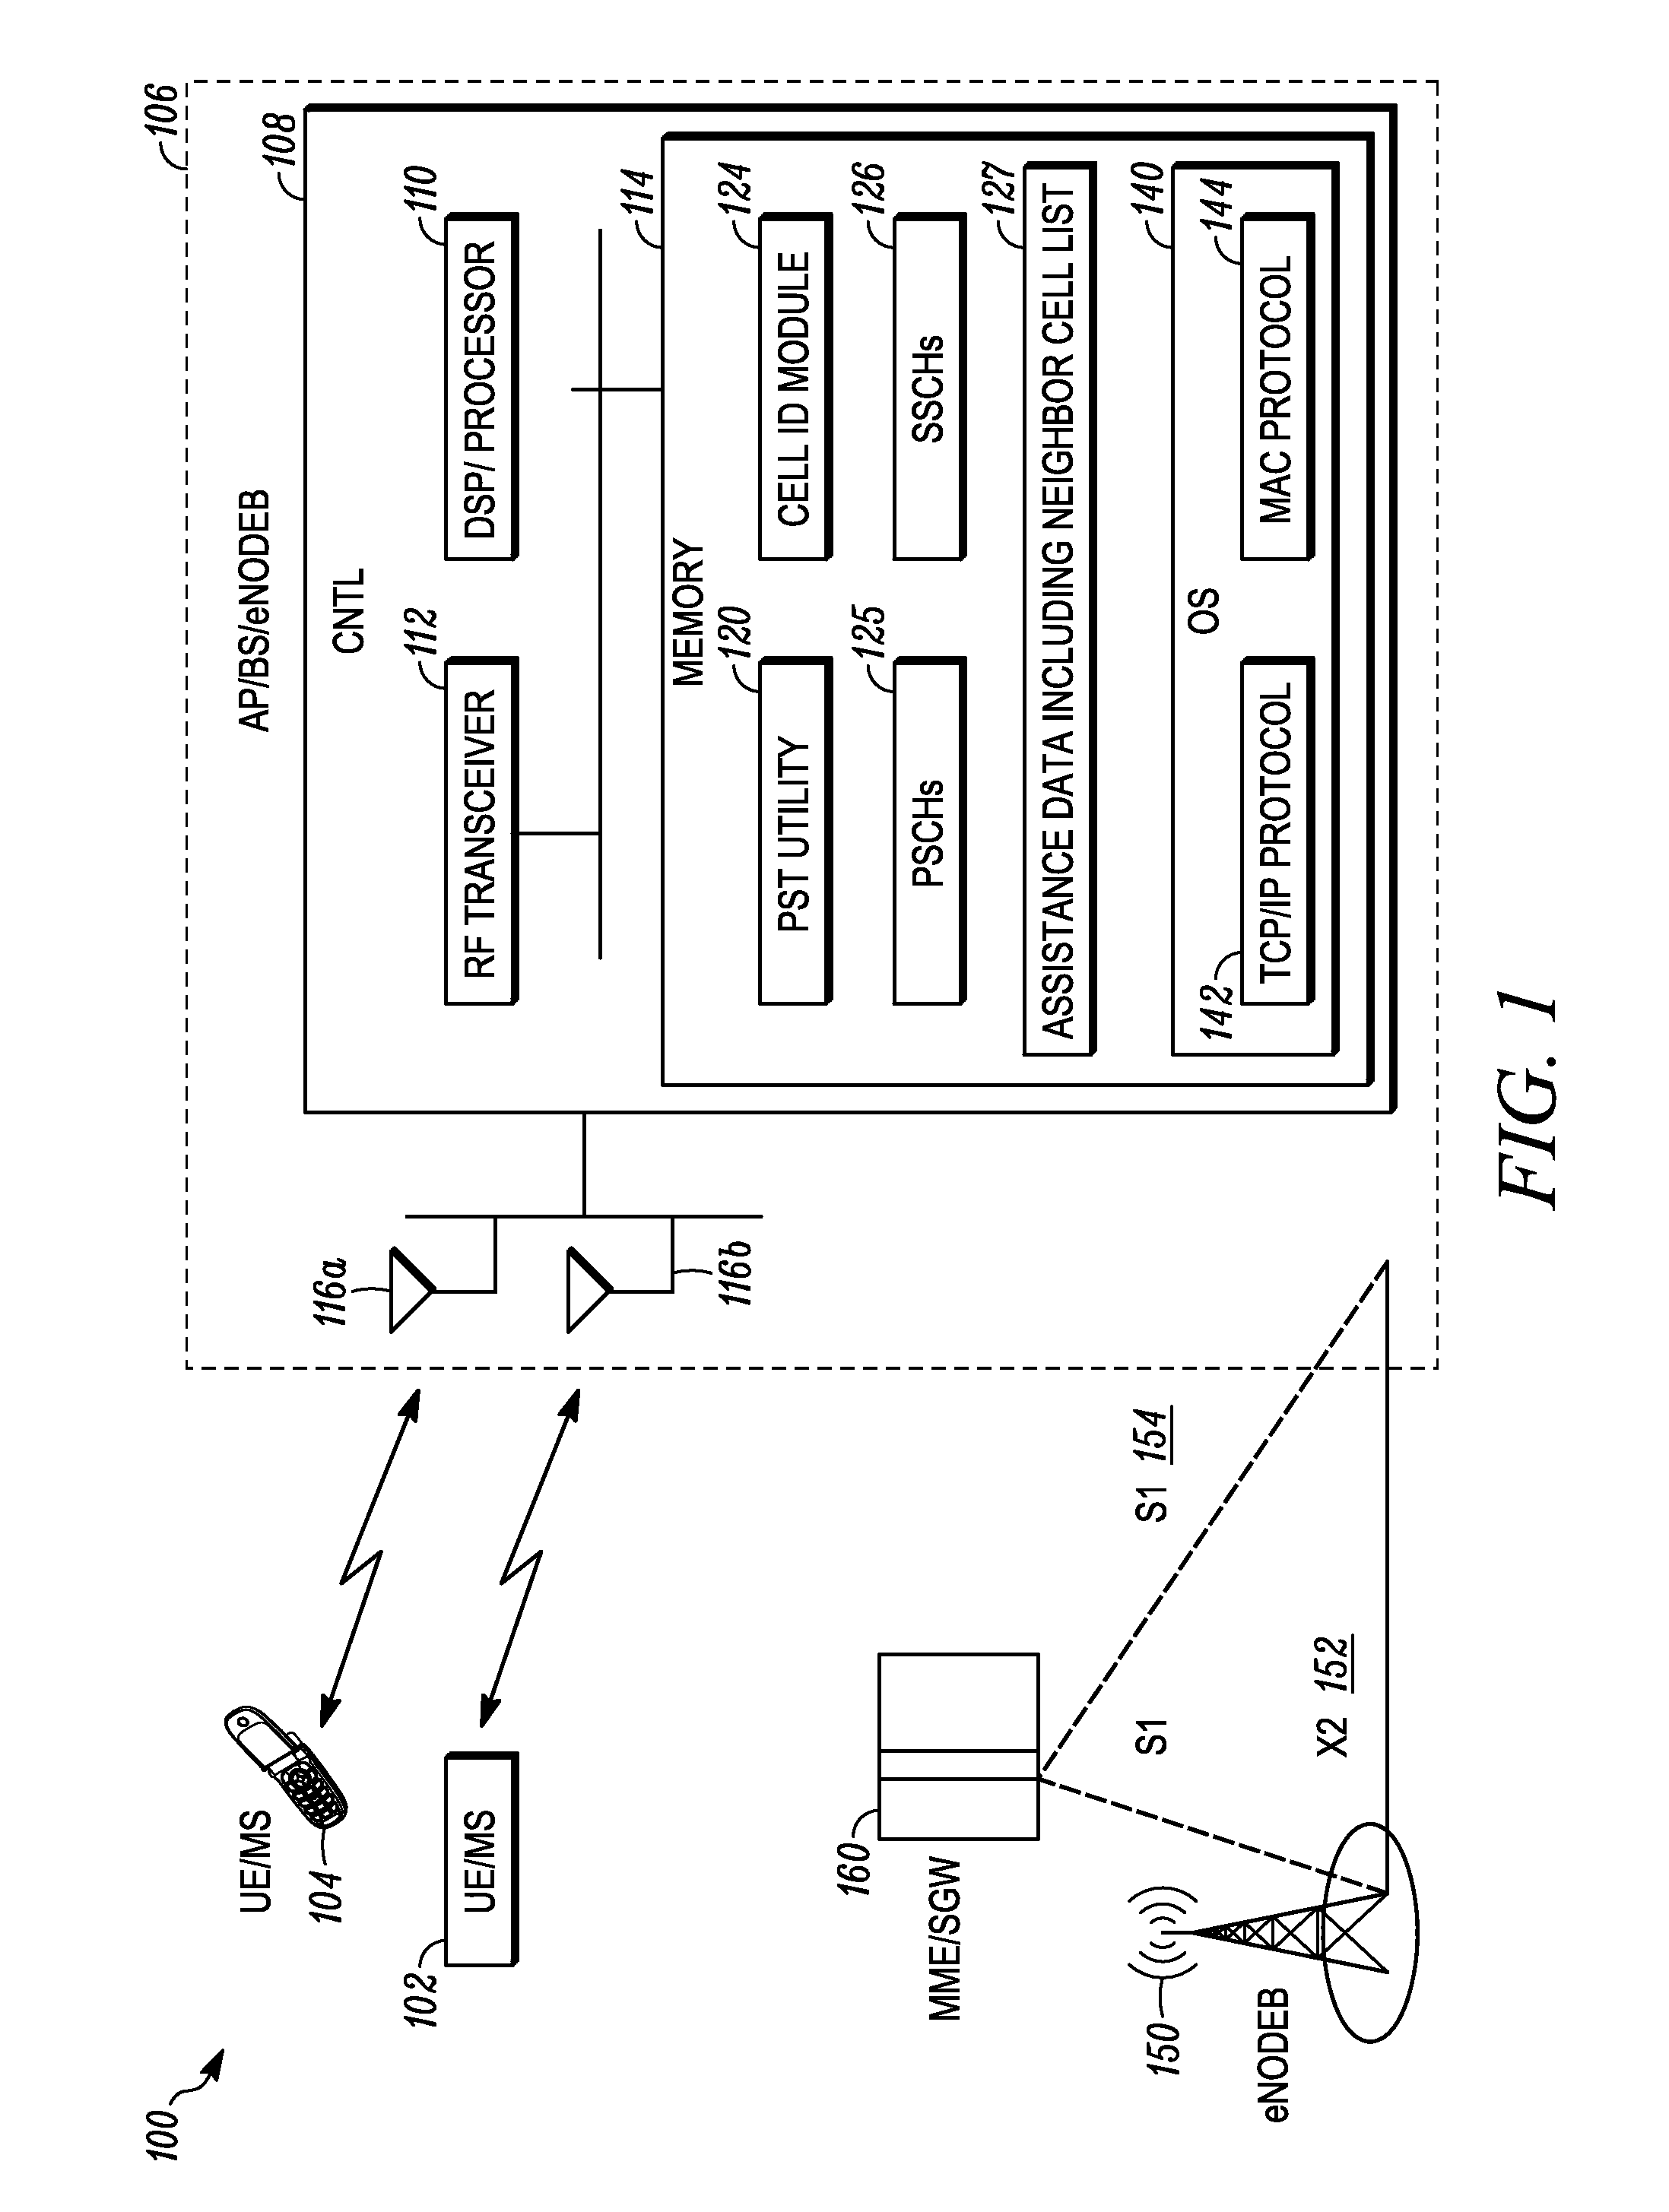 Methods for cell search in synchronous interference limited channels